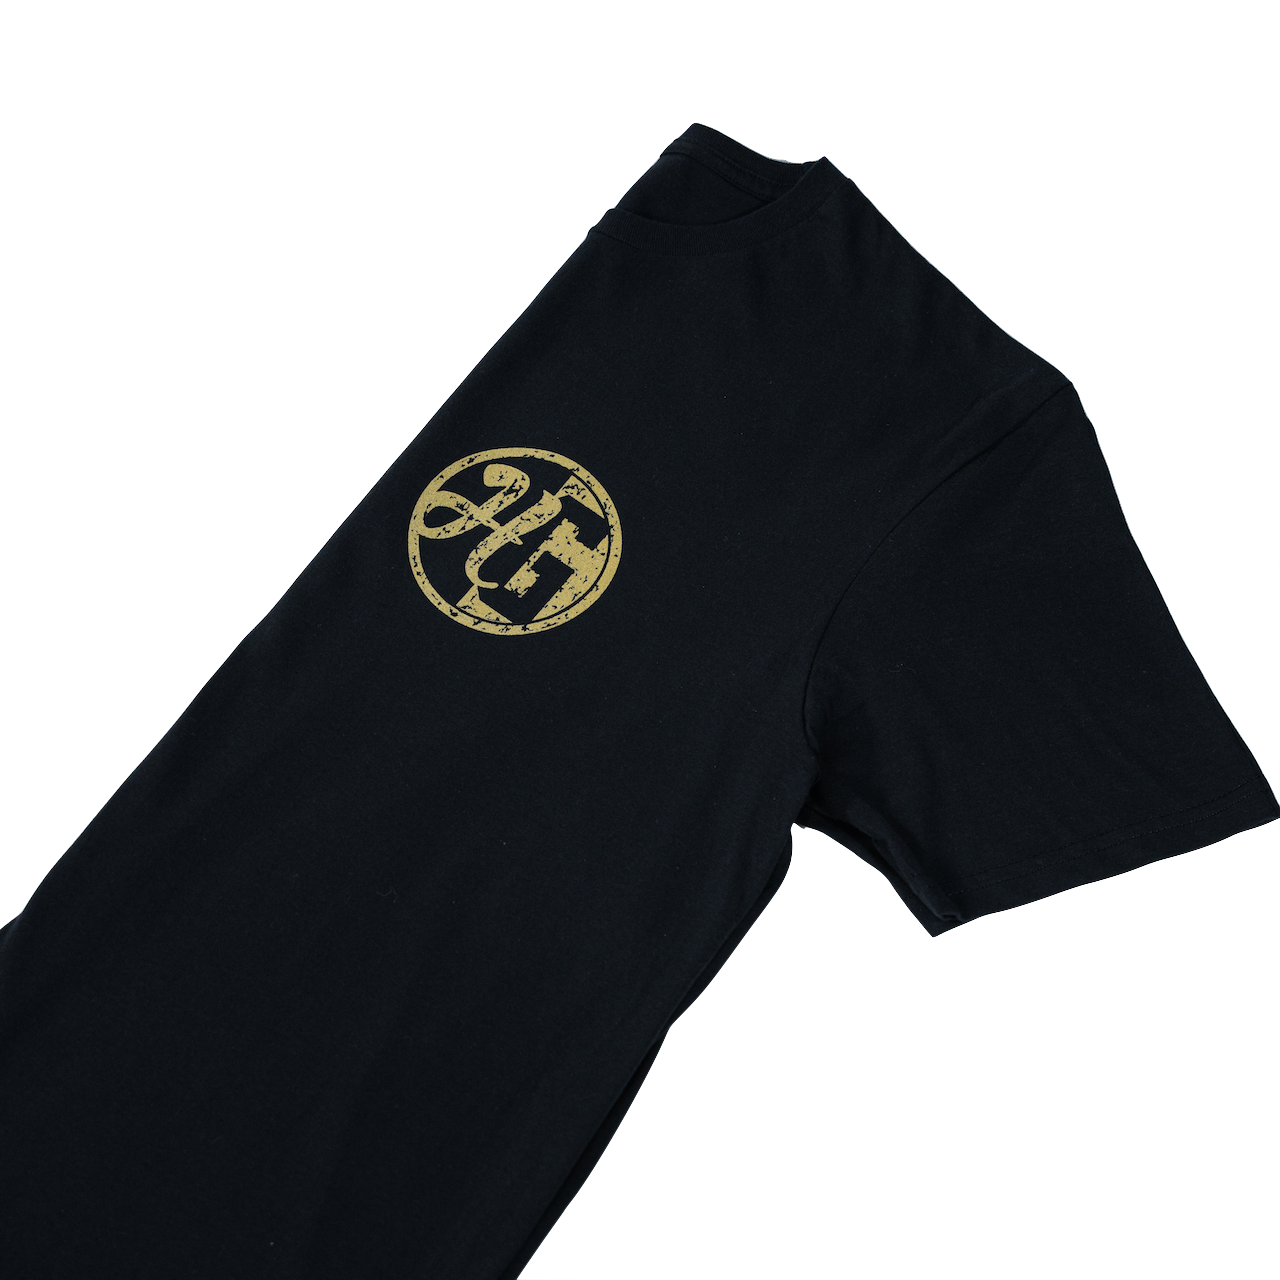 Short Sleeve Black T-Shirt with Gold